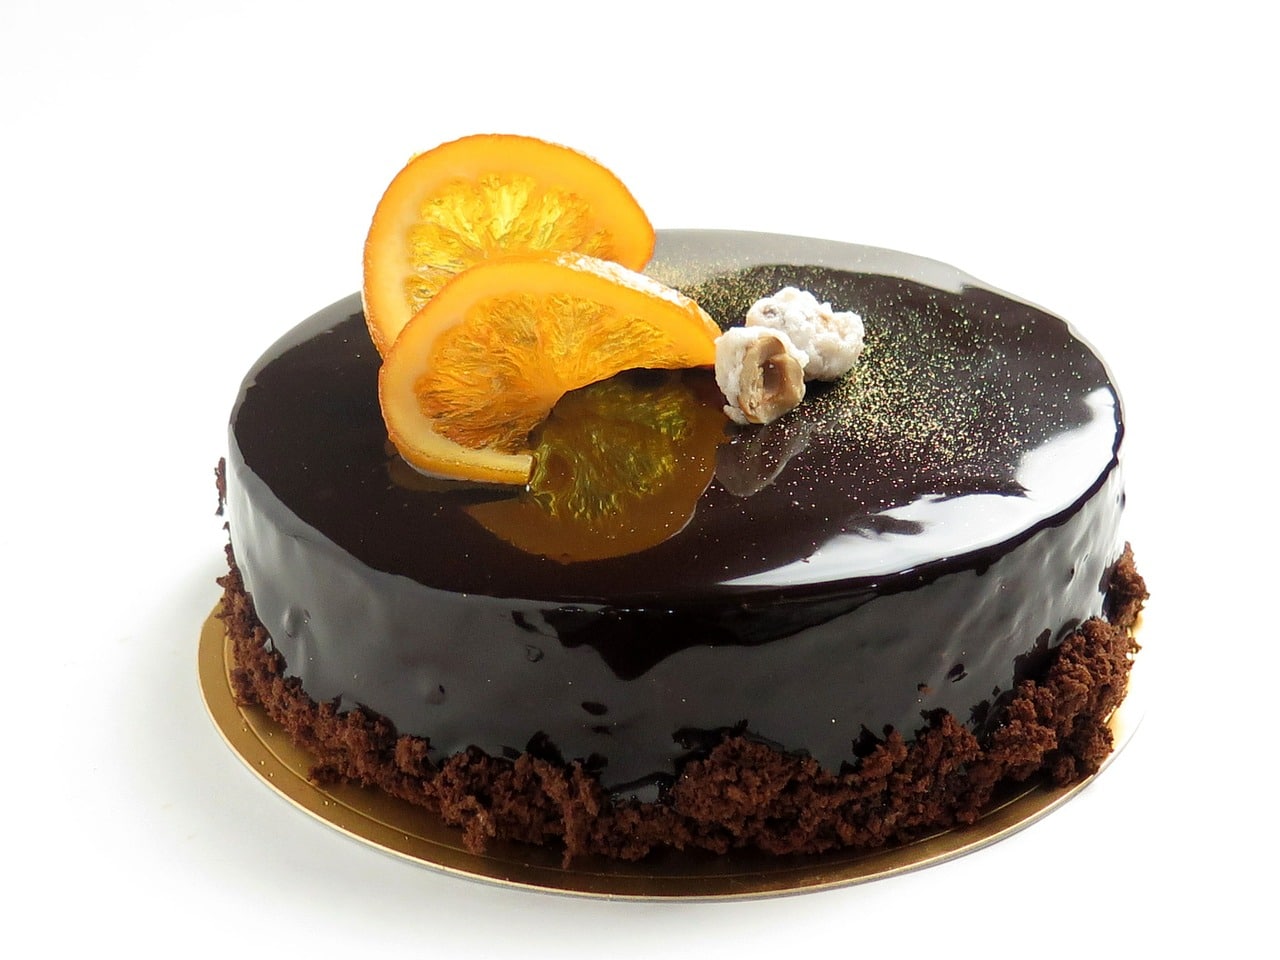 Facts About Chocolate Cakes That Will Surprise Everyone